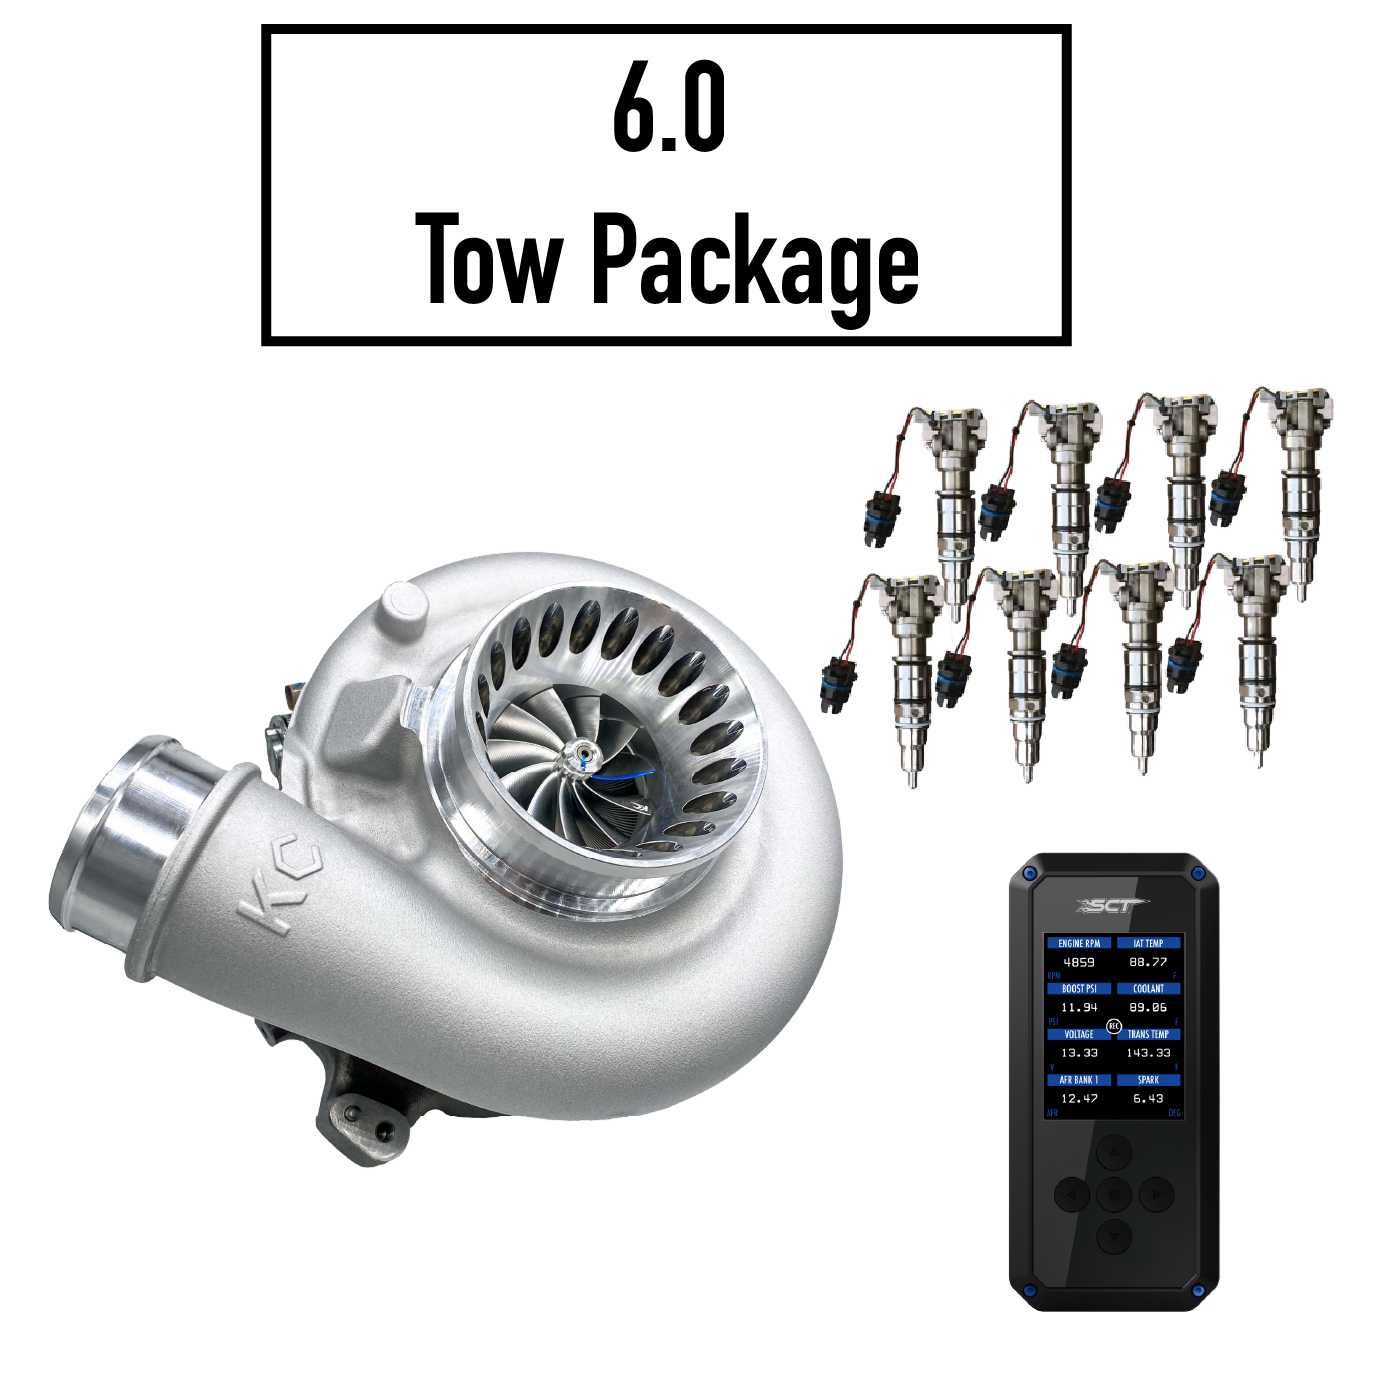 Tow Rig Package - 6.0 Powerstroke (2003-2007)